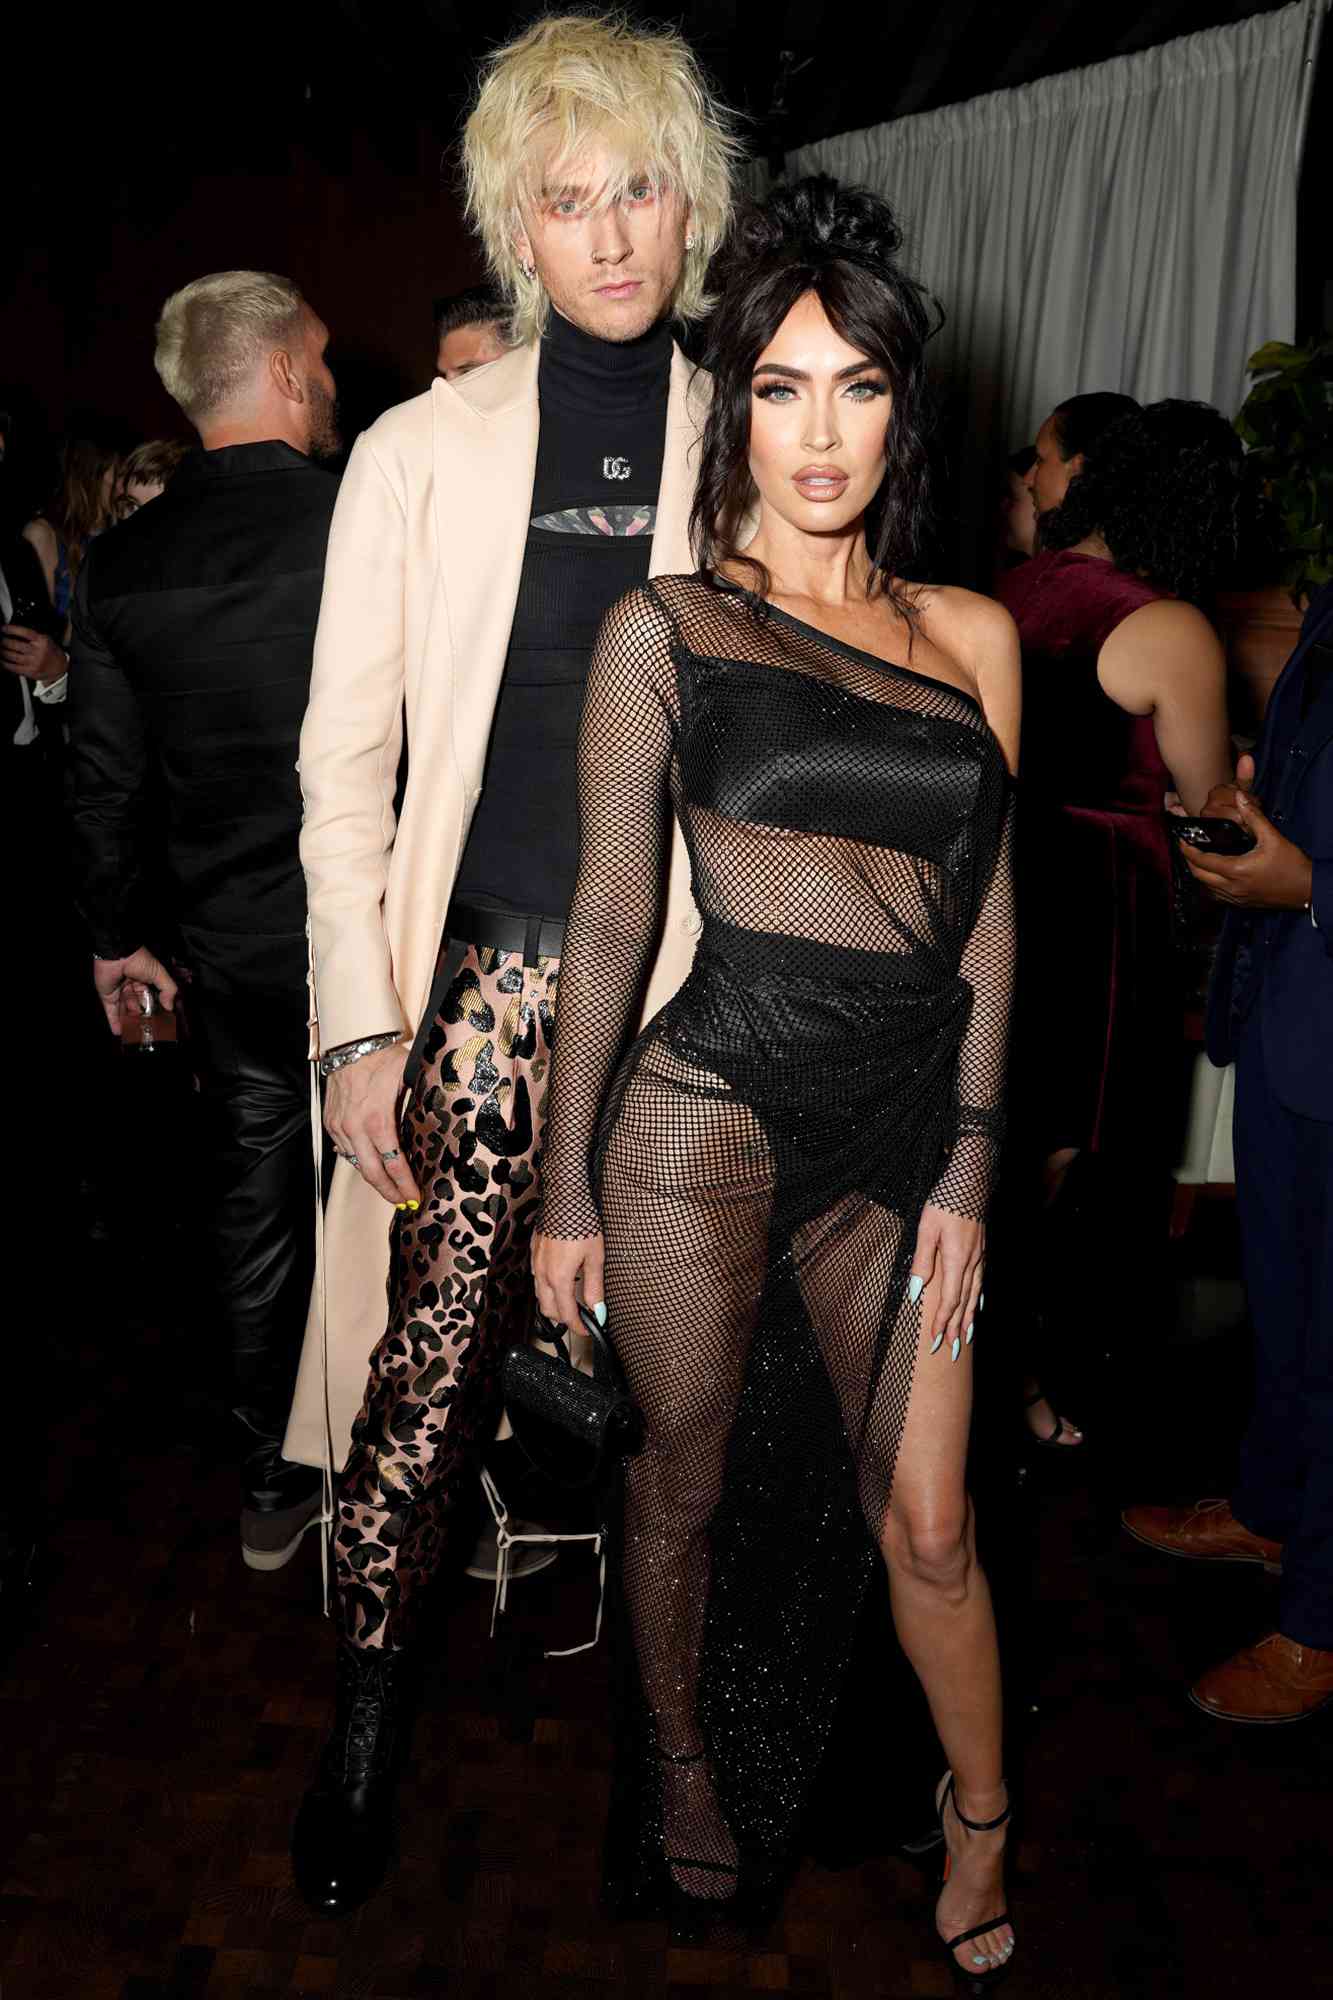 Machine Gun Kelly and Megan Fox attend the GQ Men of the Year Party 2022 at The West Hollywood EDITION on November 17, 2022 in West Hollywood, California.